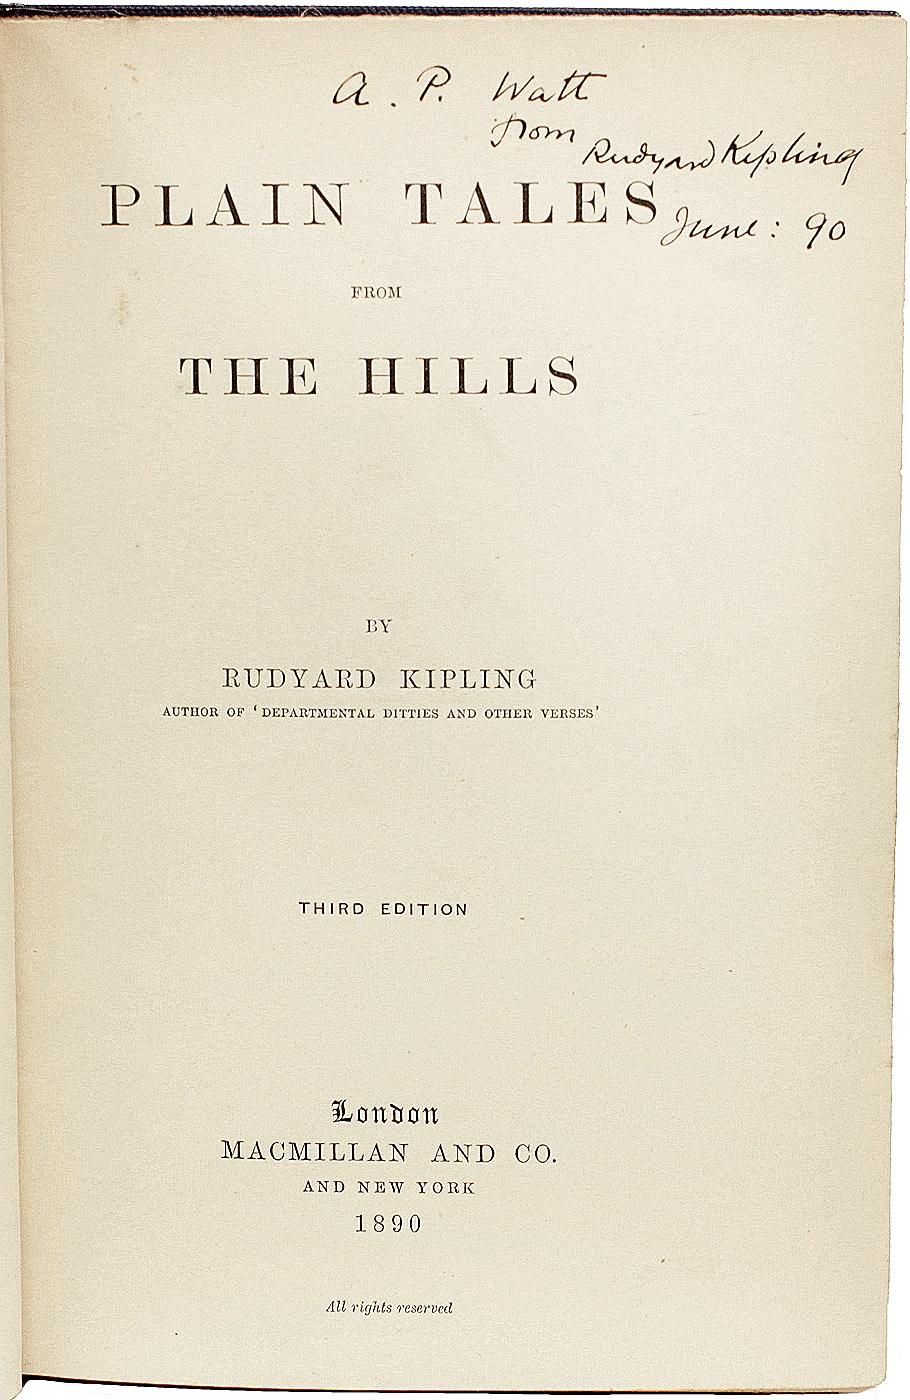 AUTHOR: KIPLING, Rudyard. 

TITLE: Plain Tales From The Hills.

PUBLISHER: London: Macmillan & Co., 1890.

DESCRIPTION: THIRD EDITION PRESENTATION COPY. 1 vol., inscribed on the title-page 